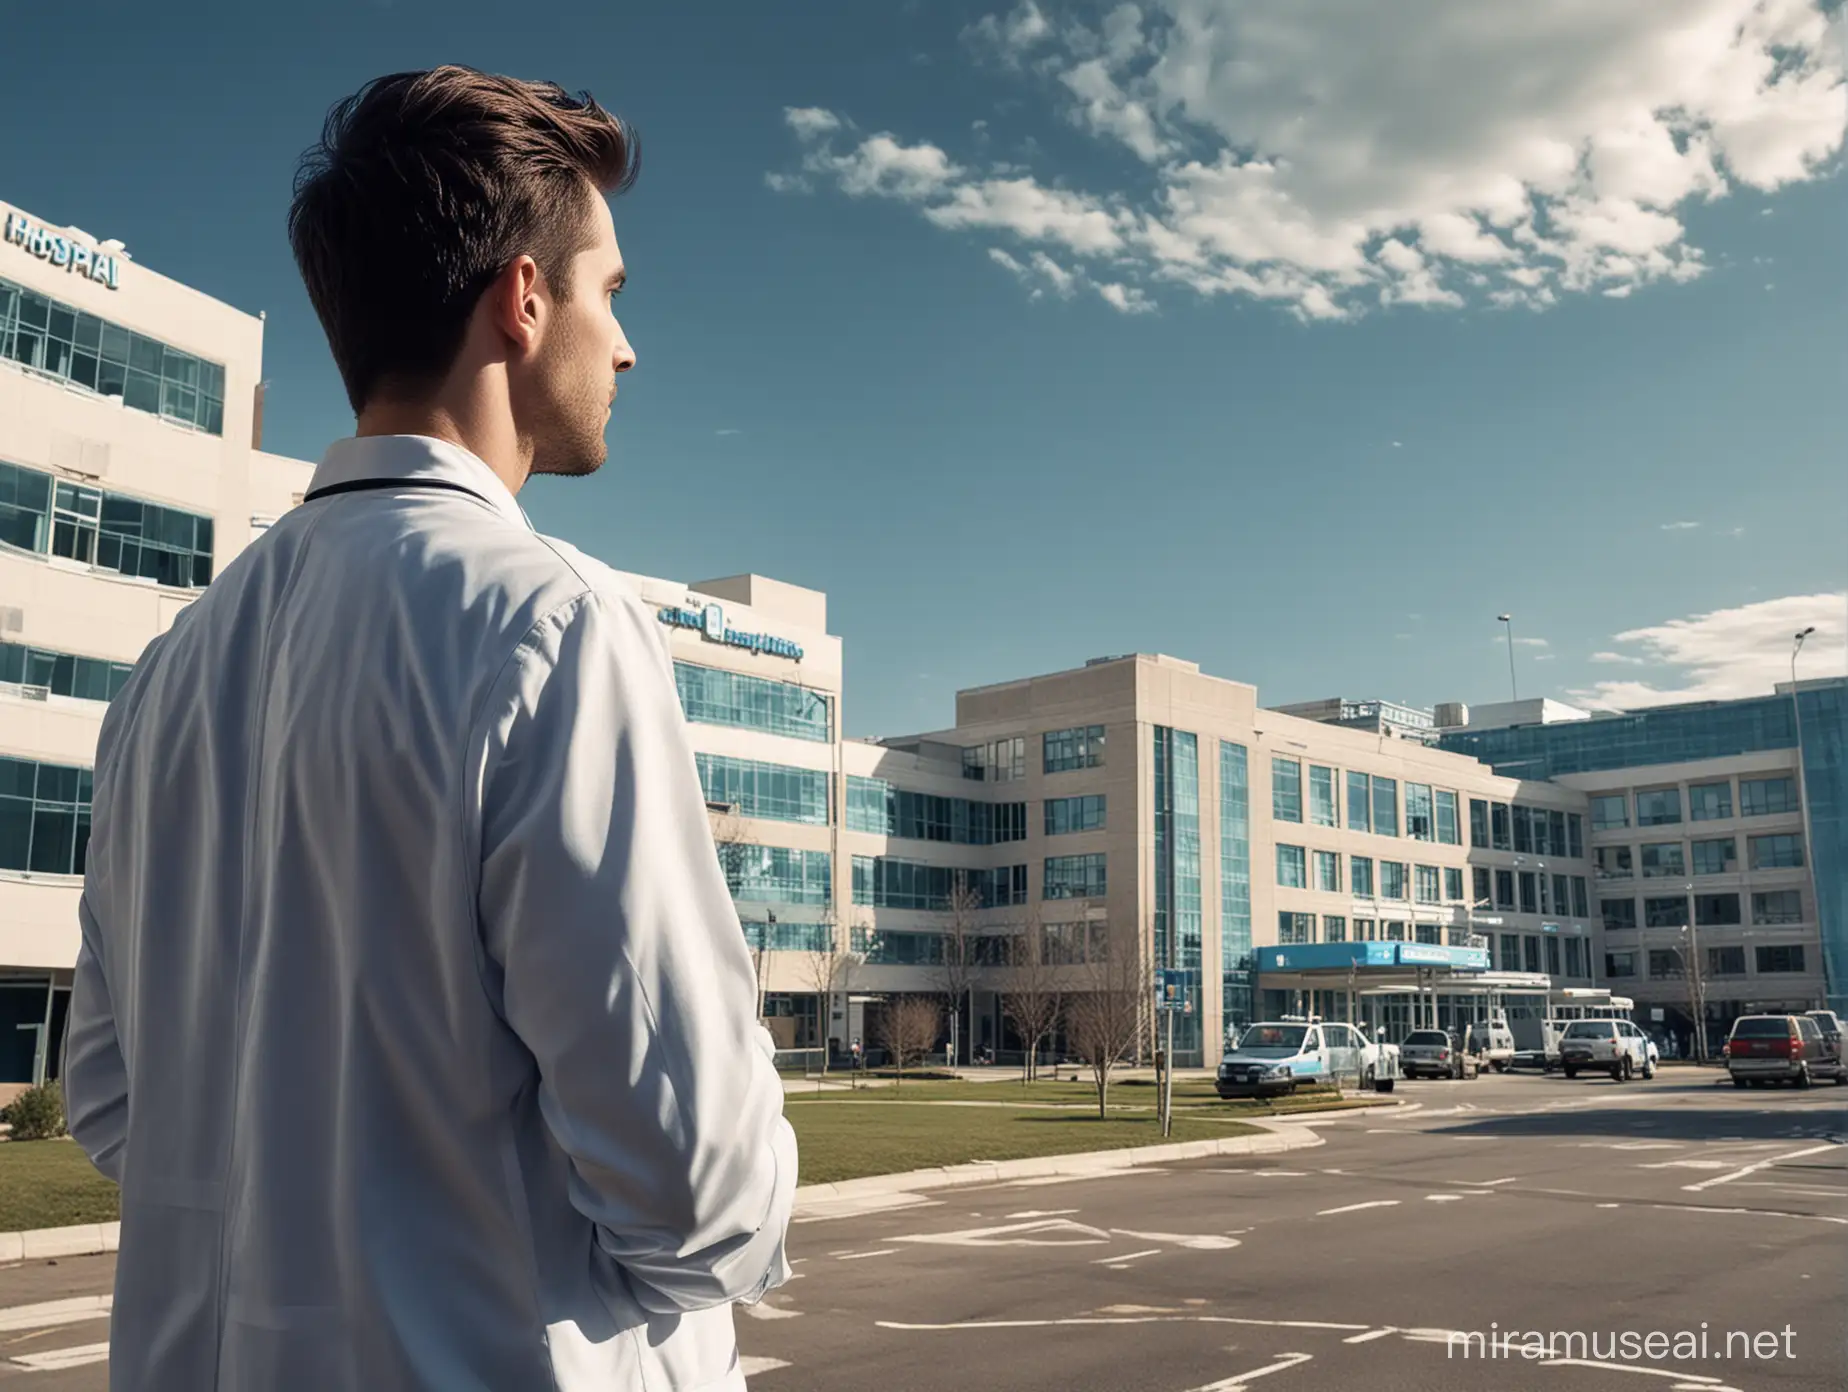 Young Student Contemplating Modern Hospital Under Blue Sky